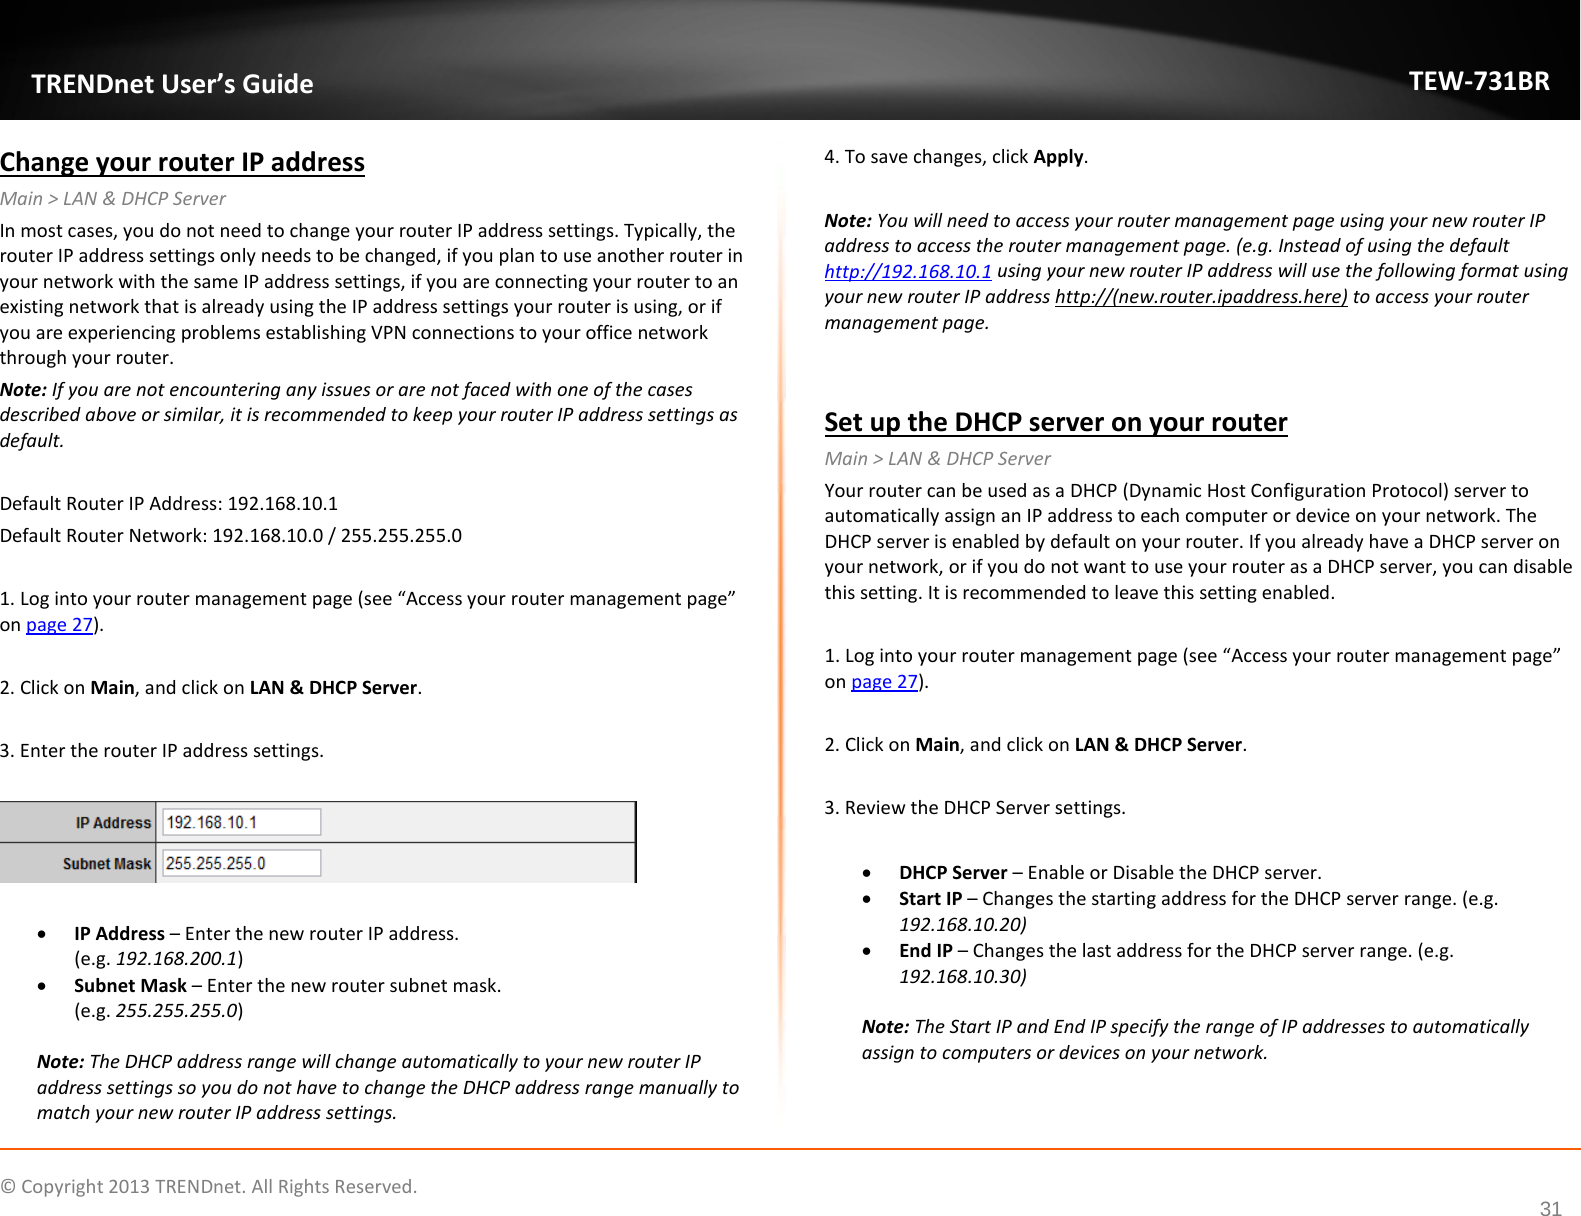             © Copyright 2013 TRENDnet. All Rights Reserved.       TRENDnet User’s Guide TEW-731BR 31 Change your router IP address Main &gt; LAN &amp; DHCP Server In most cases, you do not need to change your router IP address settings. Typically, the router IP address settings only needs to be changed, if you plan to use another router in your network with the same IP address settings, if you are connecting your router to an existing network that is already using the IP address settings your router is using, or if you are experiencing problems establishing VPN connections to your office network through your router. Note: If you are not encountering any issues or are not faced with one of the cases described above or similar, it is recommended to keep your router IP address settings as default.  Default Router IP Address: 192.168.10.1  Default Router Network: 192.168.10.0 / 255.255.255.0  1. Log into your router management page (see “Access your router management page” on page 27).  2. Click on Main, and click on LAN &amp; DHCP Server.  3. Enter the router IP address settings.    • IP Address – Enter the new router IP address.  (e.g. 192.168.200.1) • Subnet Mask – Enter the new router subnet mask. (e.g. 255.255.255.0)  Note: The DHCP address range will change automatically to your new router IP address settings so you do not have to change the DHCP address range manually to match your new router IP address settings.  4. To save changes, click Apply.  Note: You will need to access your router management page using your new router IP address to access the router management page. (e.g. Instead of using the default http://192.168.10.1 using your new router IP address will use the following format using your new router IP address http://(new.router.ipaddress.here) to access your router management page.   Set up the DHCP server on your router Main &gt; LAN &amp; DHCP Server Your router can be used as a DHCP (Dynamic Host Configuration Protocol) server to automatically assign an IP address to each computer or device on your network. The DHCP server is enabled by default on your router. If you already have a DHCP server on your network, or if you do not want to use your router as a DHCP server, you can disable this setting. It is recommended to leave this setting enabled.  1. Log into your router management page (see “Access your router management page” on page 27).  2. Click on Main, and click on LAN &amp; DHCP Server.  3. Review the DHCP Server settings.  • DHCP Server – Enable or Disable the DHCP server. • Start IP – Changes the starting address for the DHCP server range. (e.g. 192.168.10.20) • End IP – Changes the last address for the DHCP server range. (e.g. 192.168.10.30)  Note: The Start IP and End IP specify the range of IP addresses to automatically assign to computers or devices on your network.   